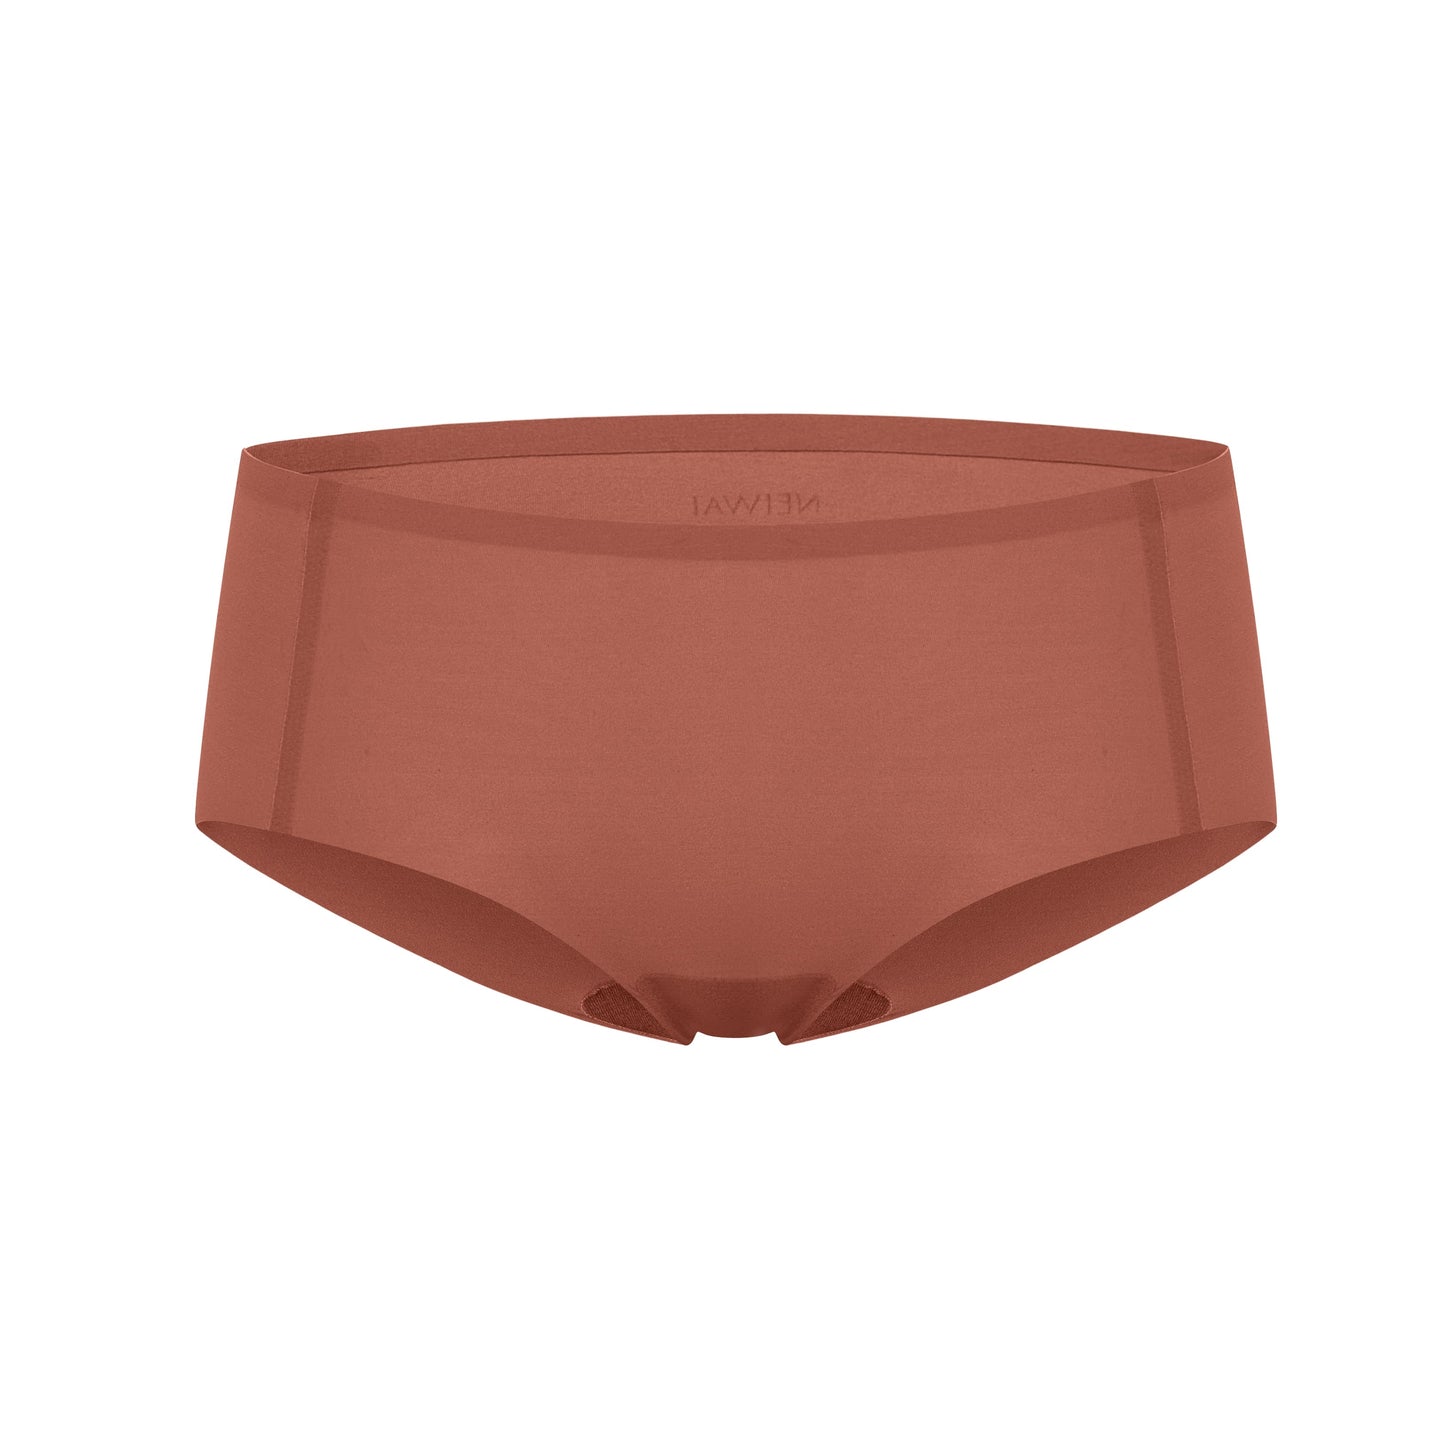 Fat lay image of rust-colored underwear